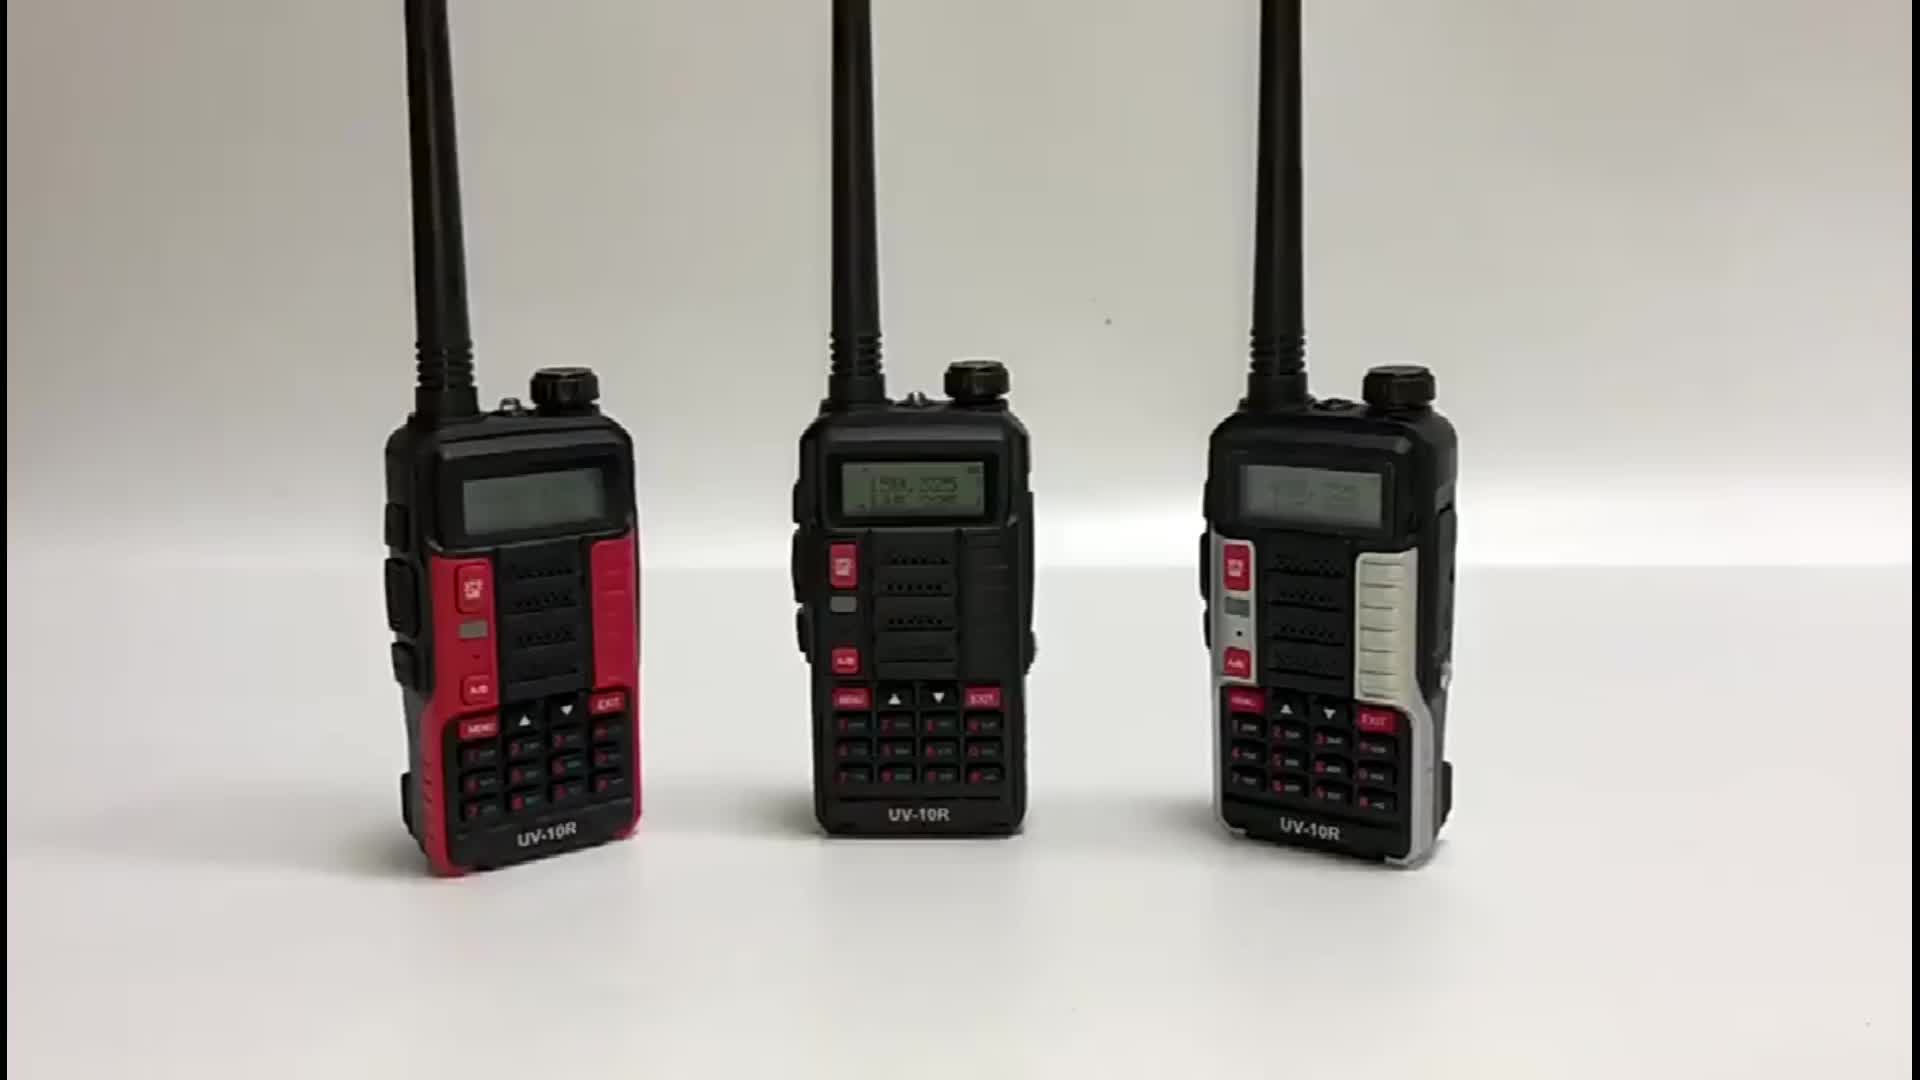 2023 Baofeng High Powerful 3 Power Model Professional Portable Walkie Talkie Uv-10r V2 128 Channels Larger Capacity Battery Transceiver Dual Band Two Way Cb Ham Radio Transceiver Long Range picture